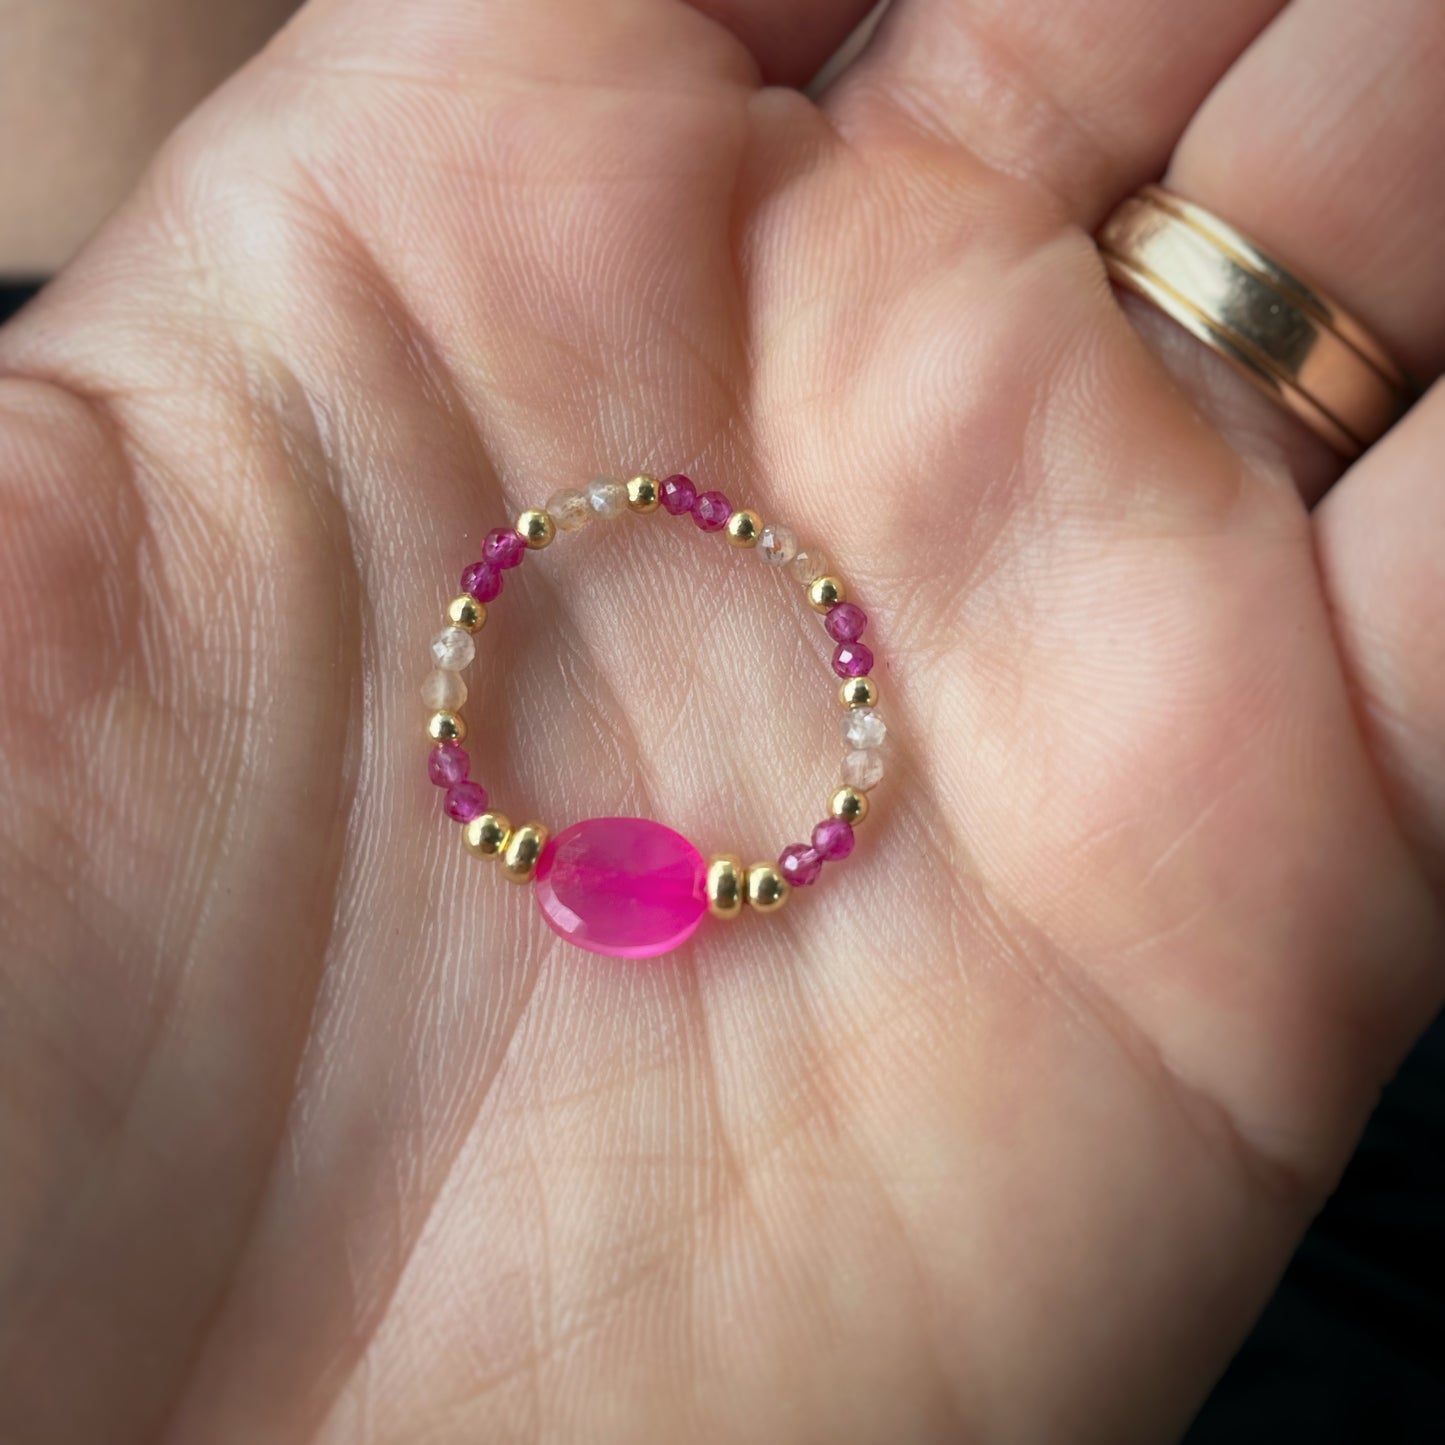 Mad Pink Ring